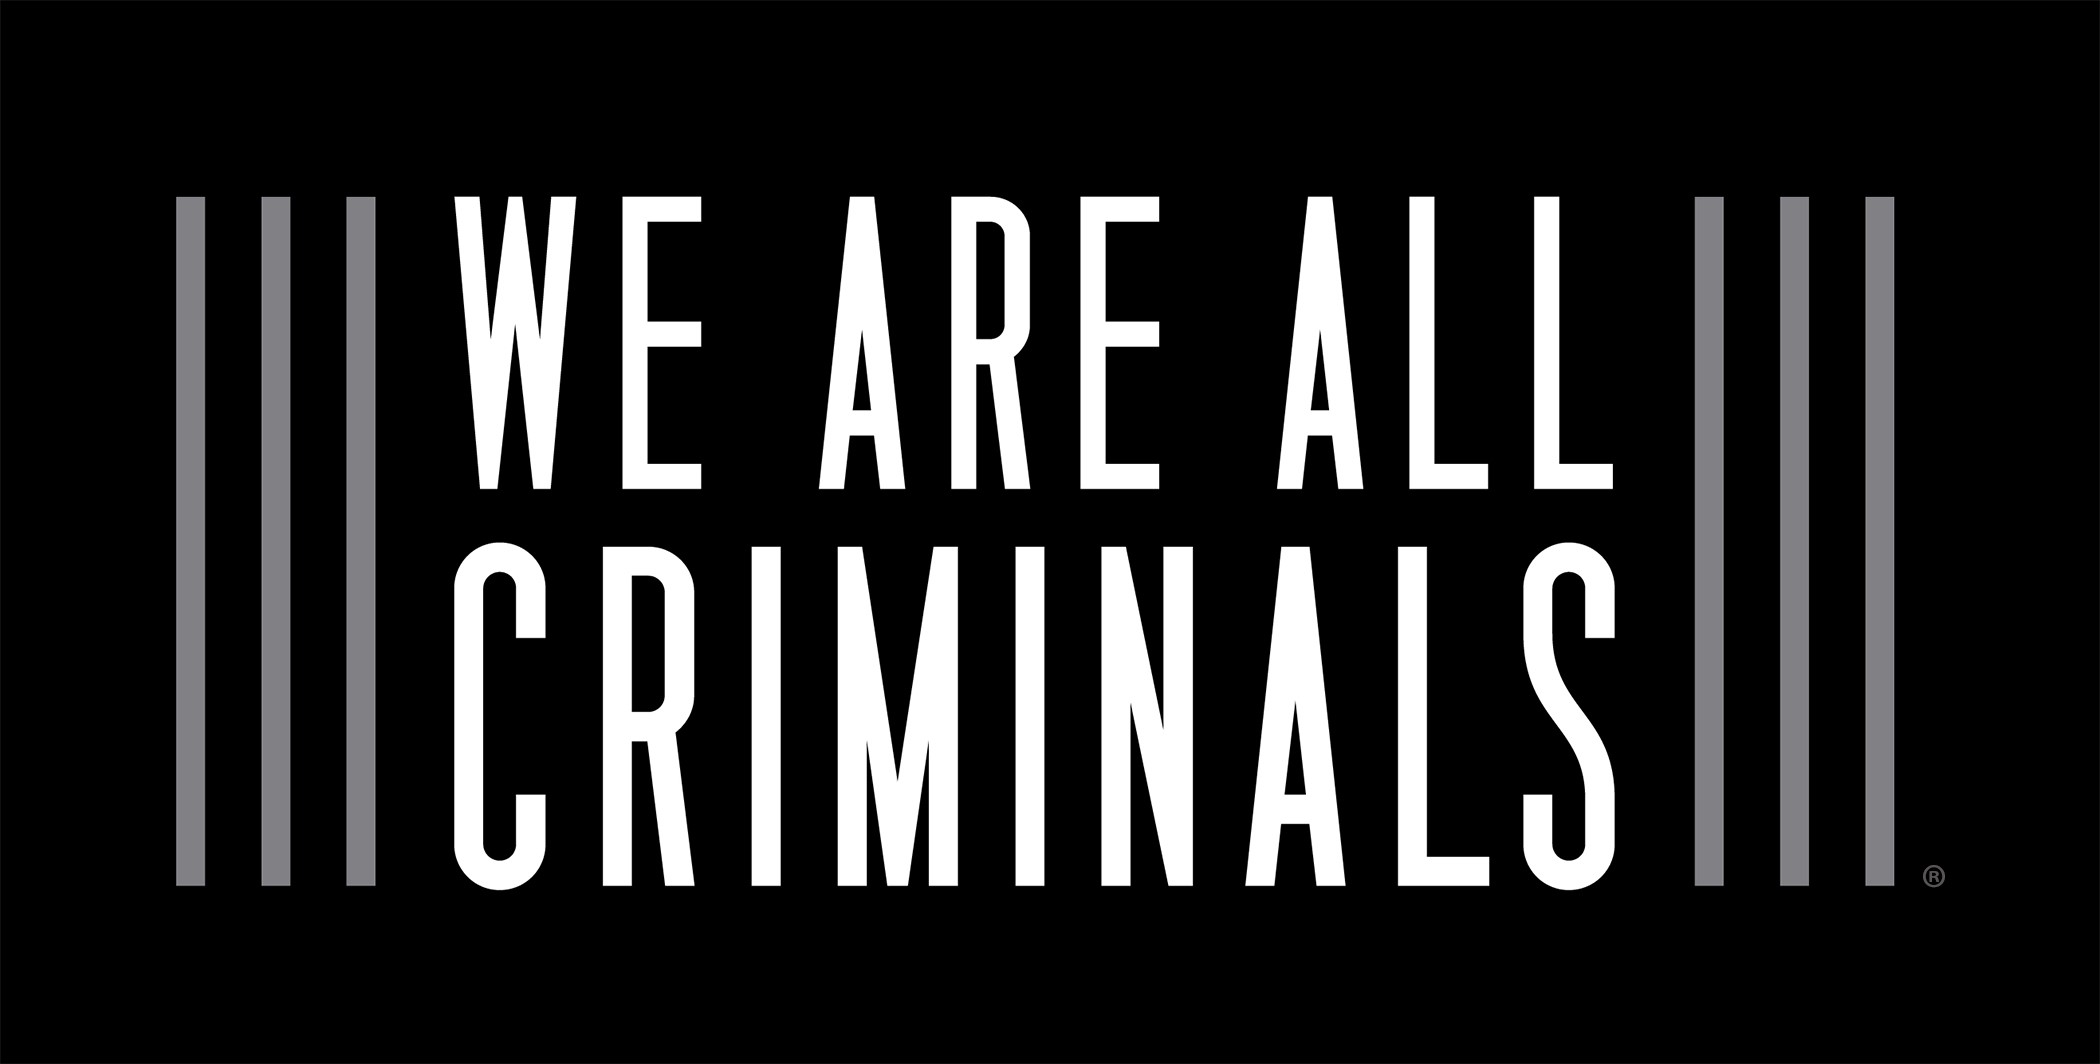 Fair Opportunities Speaker Event - We Are All Criminals Main Photo